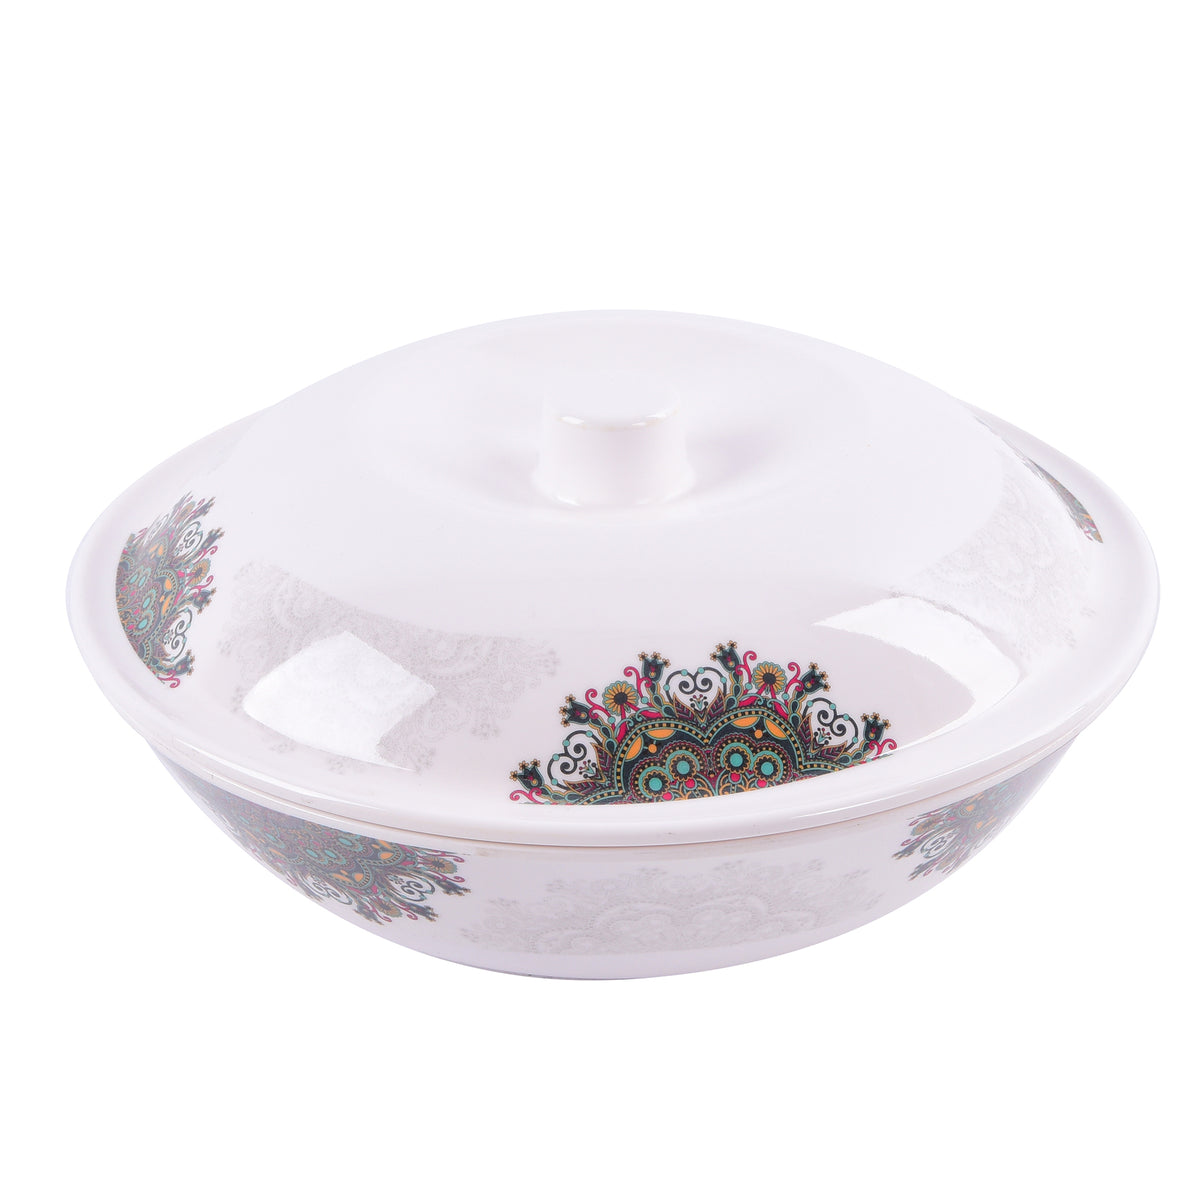 Serving bowl with lid